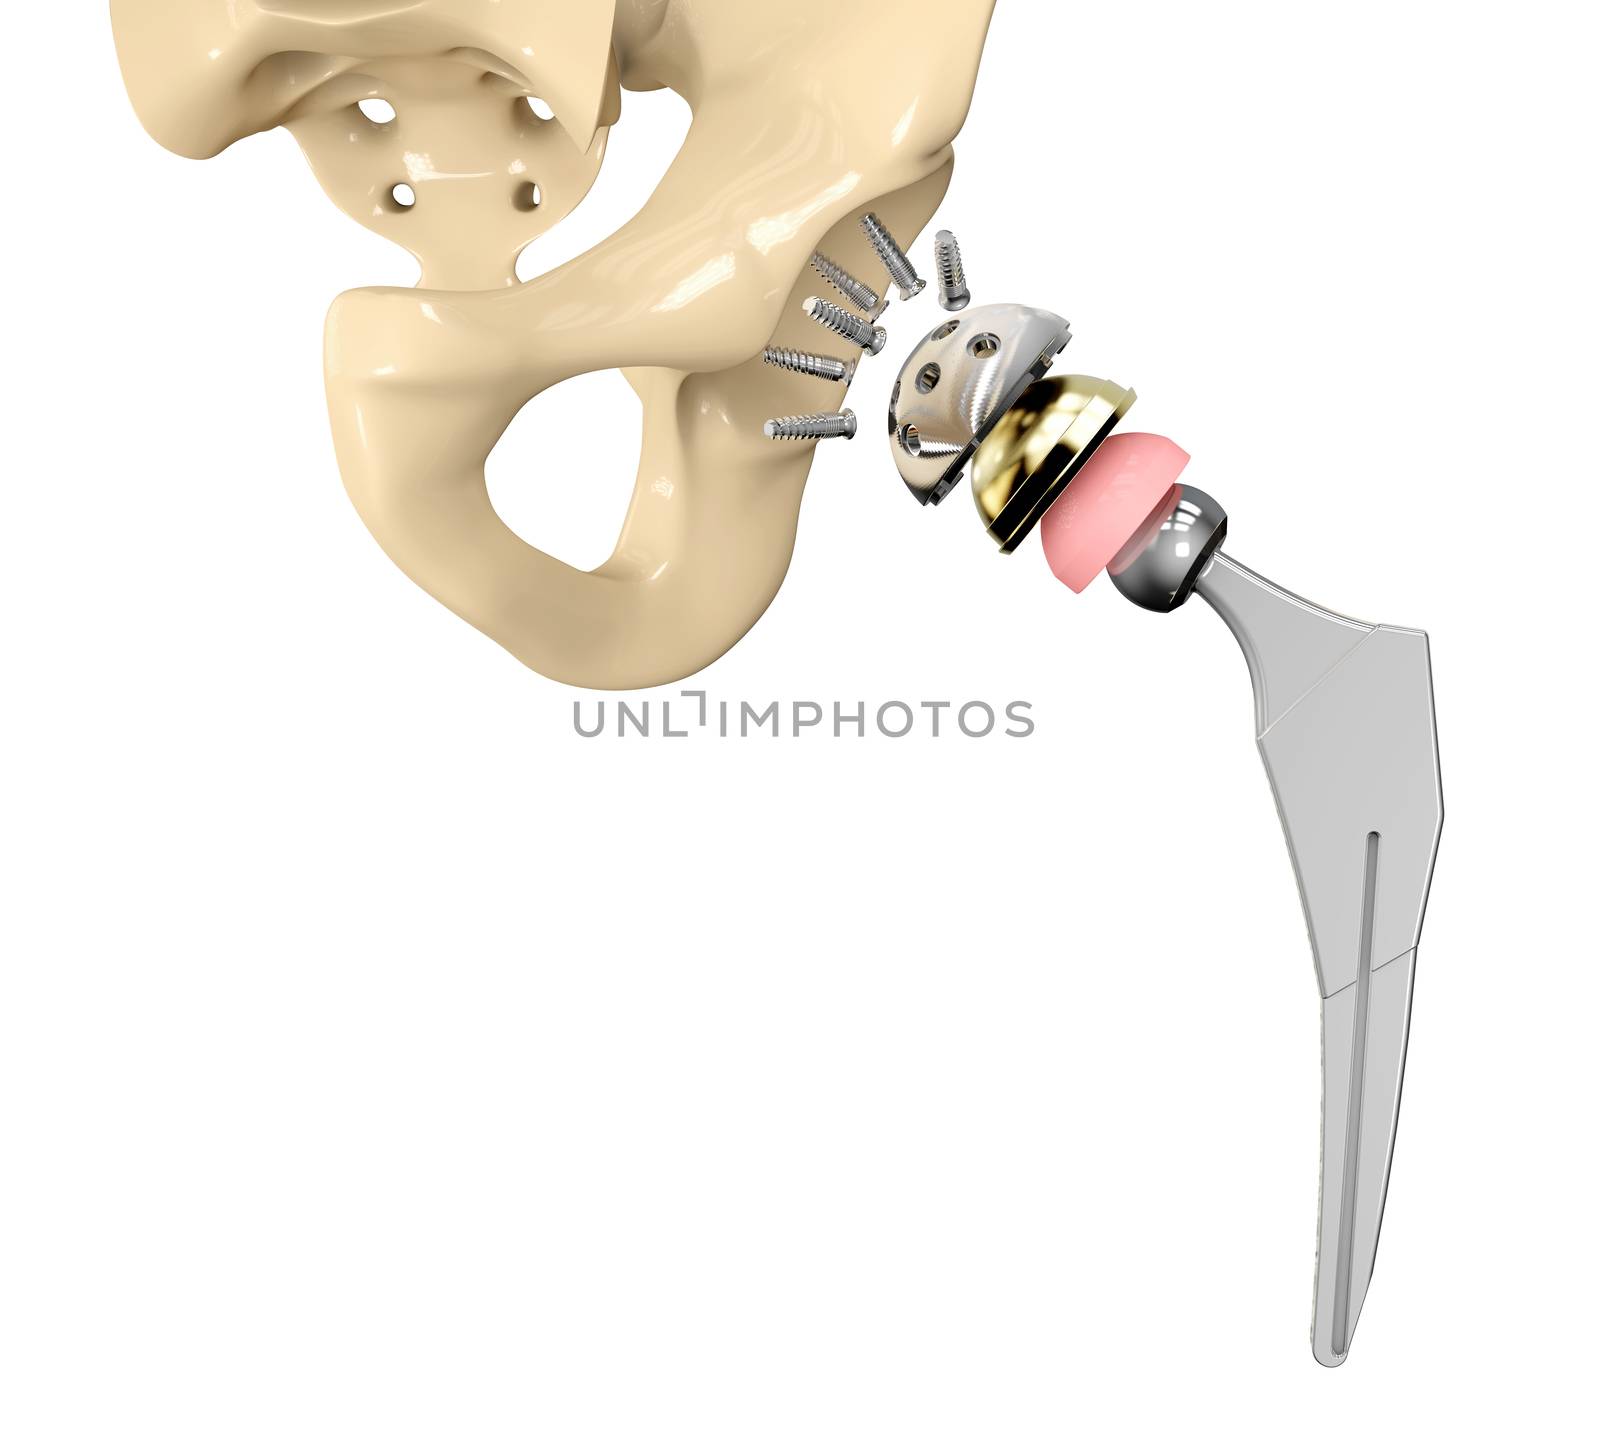 3D illustration of Hip replacement implant installed in the pelvis bone.